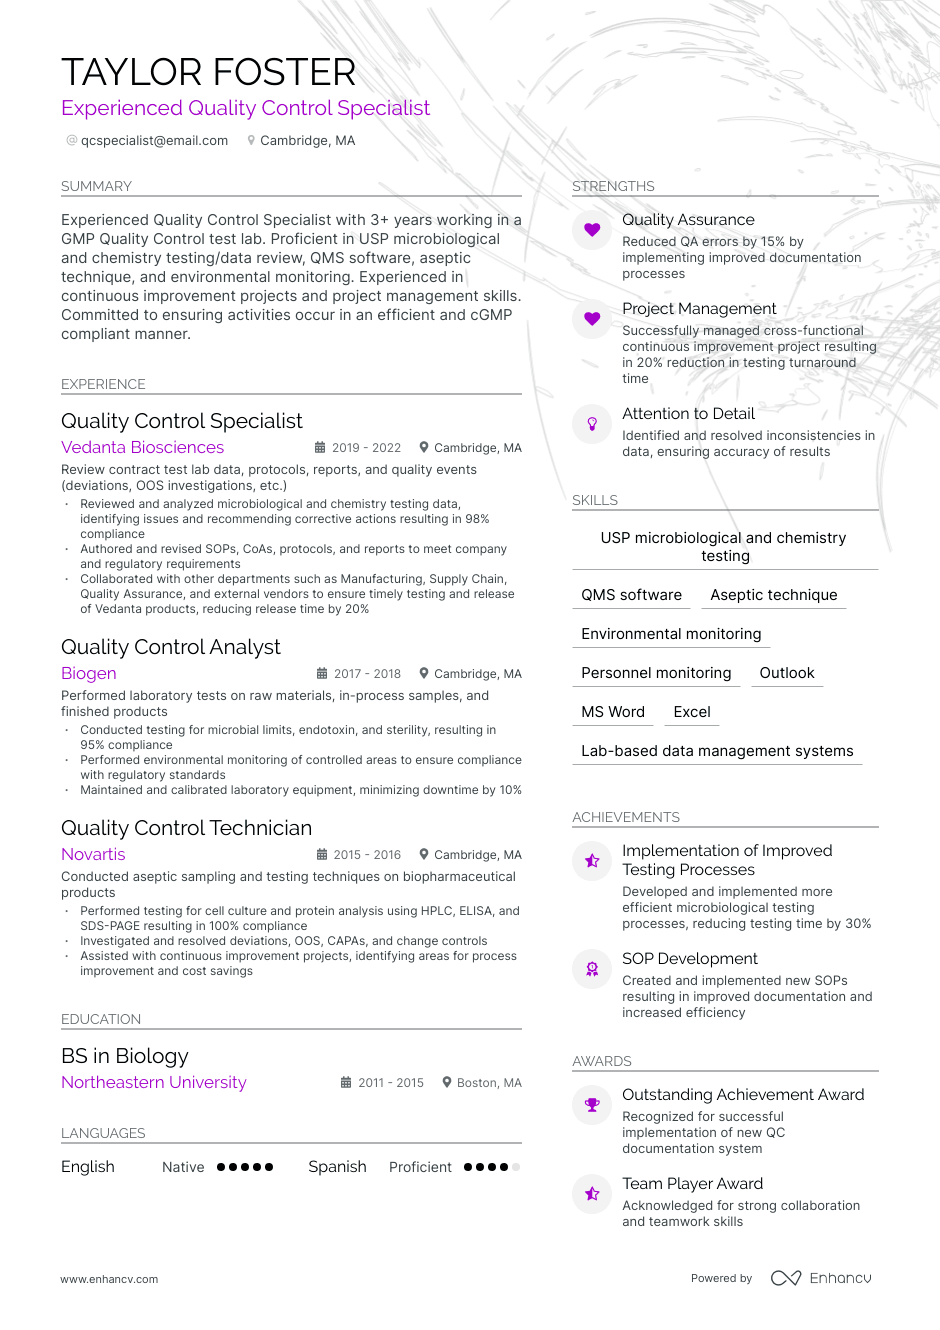 Quality Control Specialist resume example